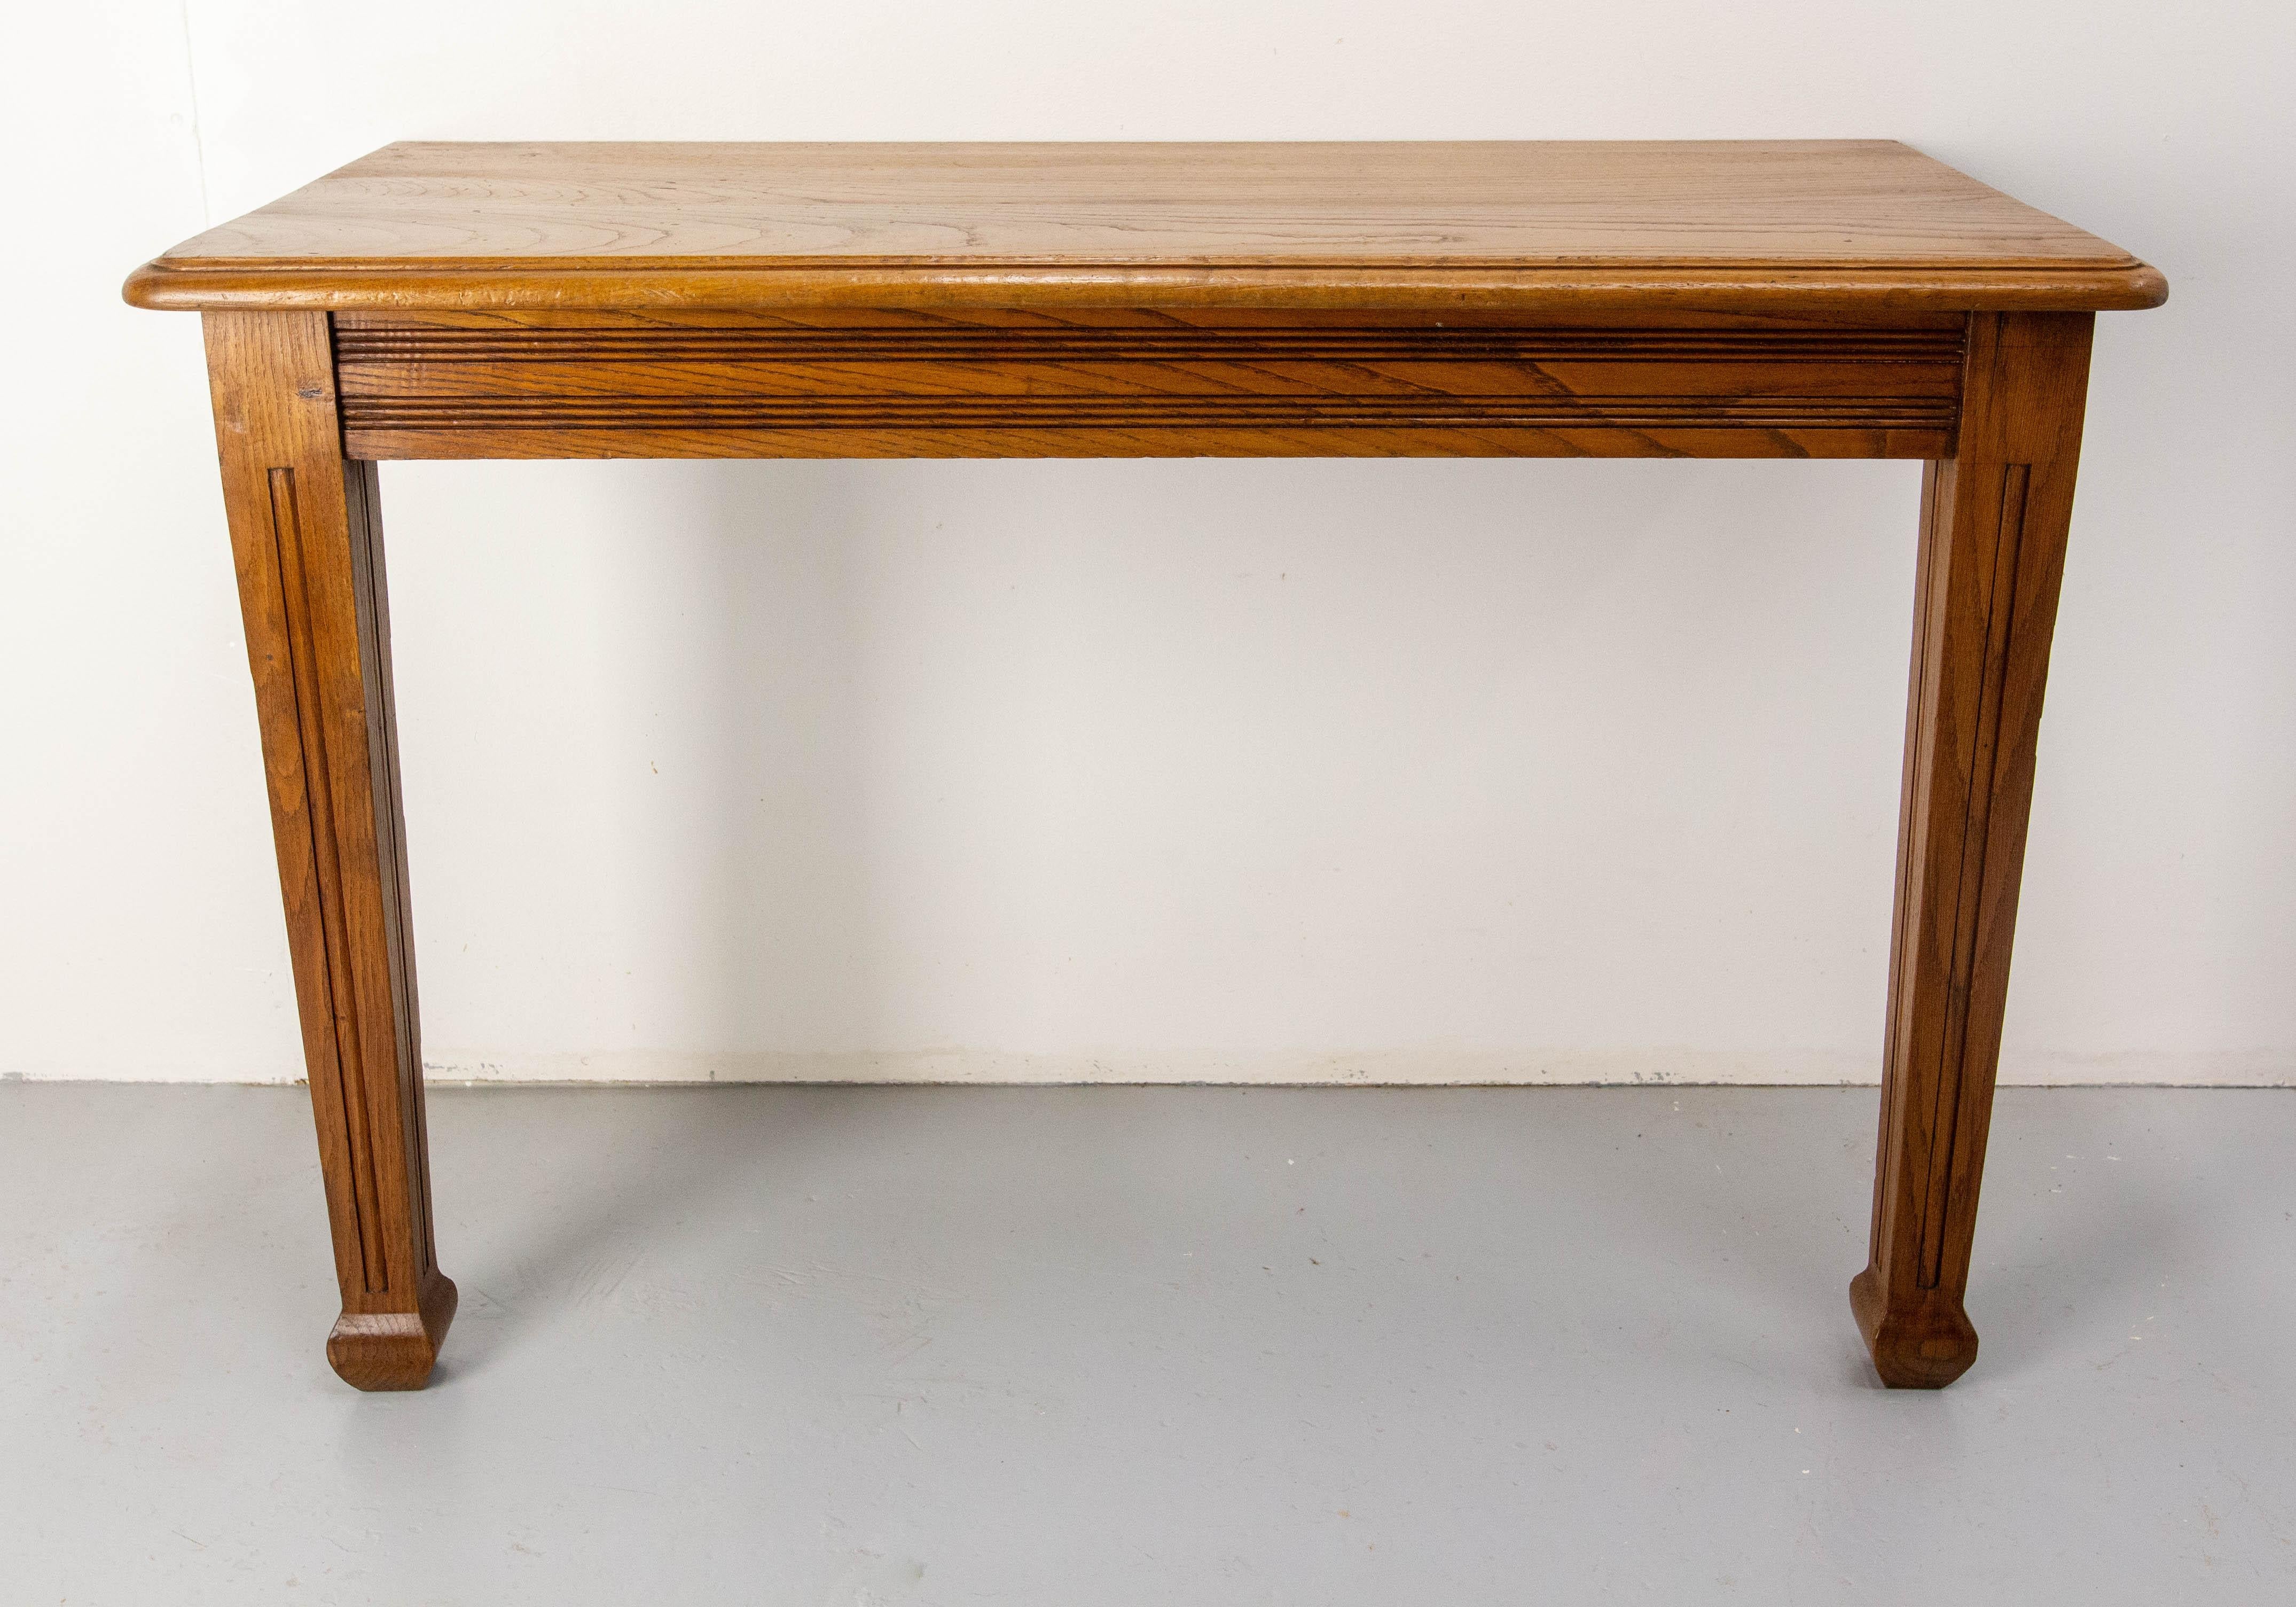 French Art Déco wall console made circa 1940.
It was made from an original oak dining table which has been transformed into a console to make a simple and original piece of furniture. This format is perfect to be used in an entry hall and in a part